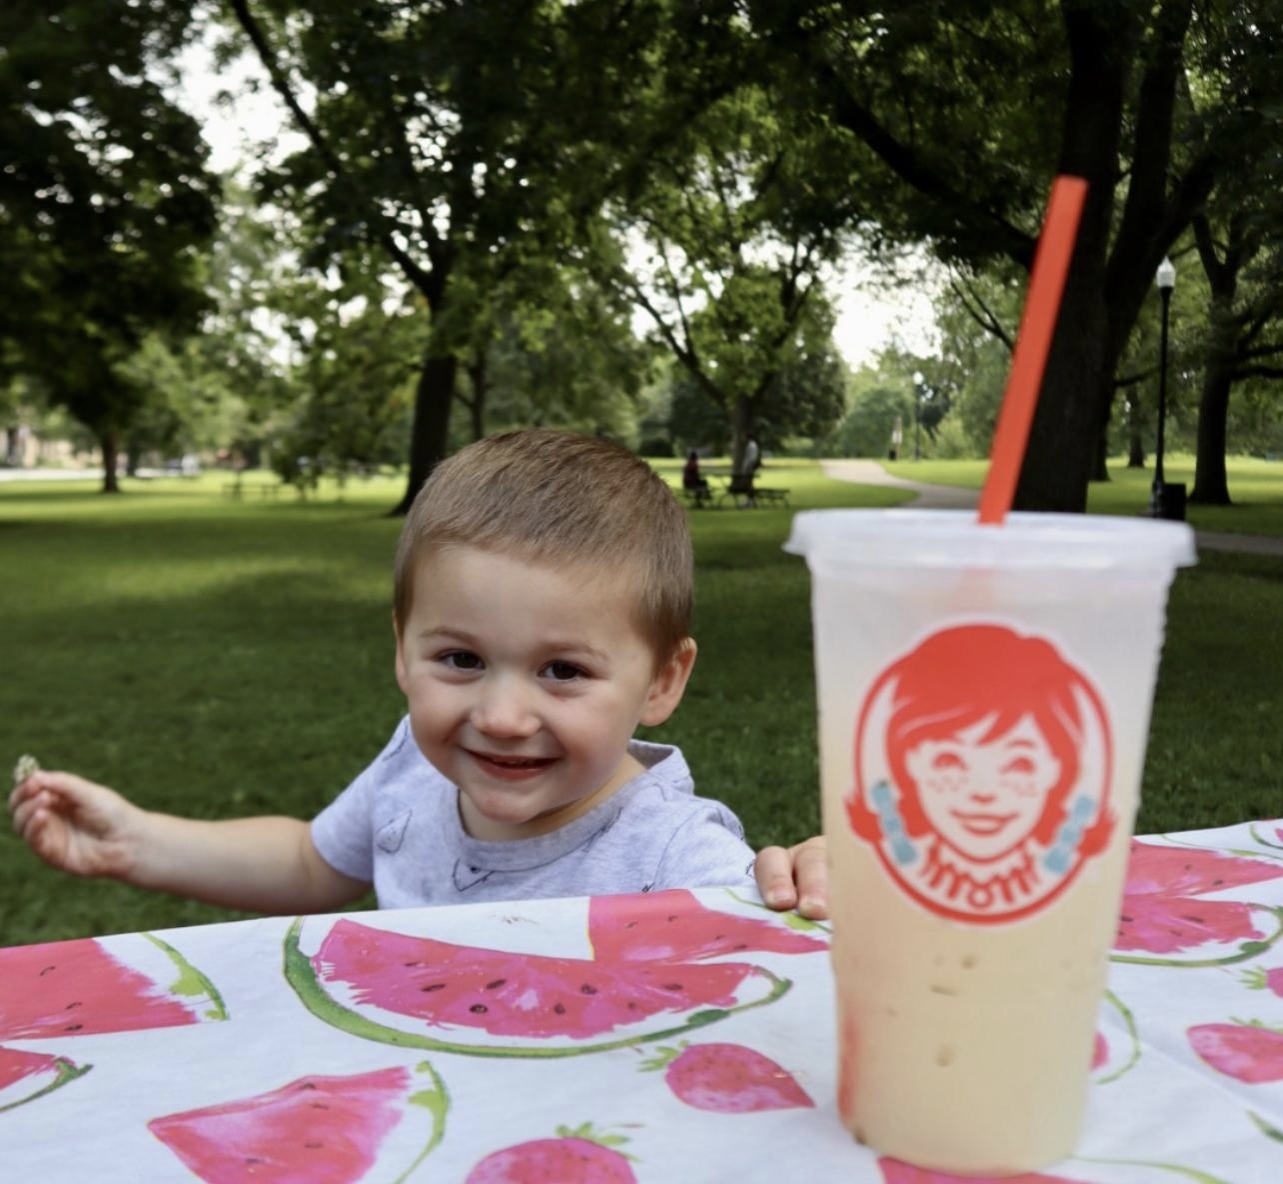 From the Classic Baconator to the Frosty Cold Brew: Why Wendy’s Breakfast is a Go-To